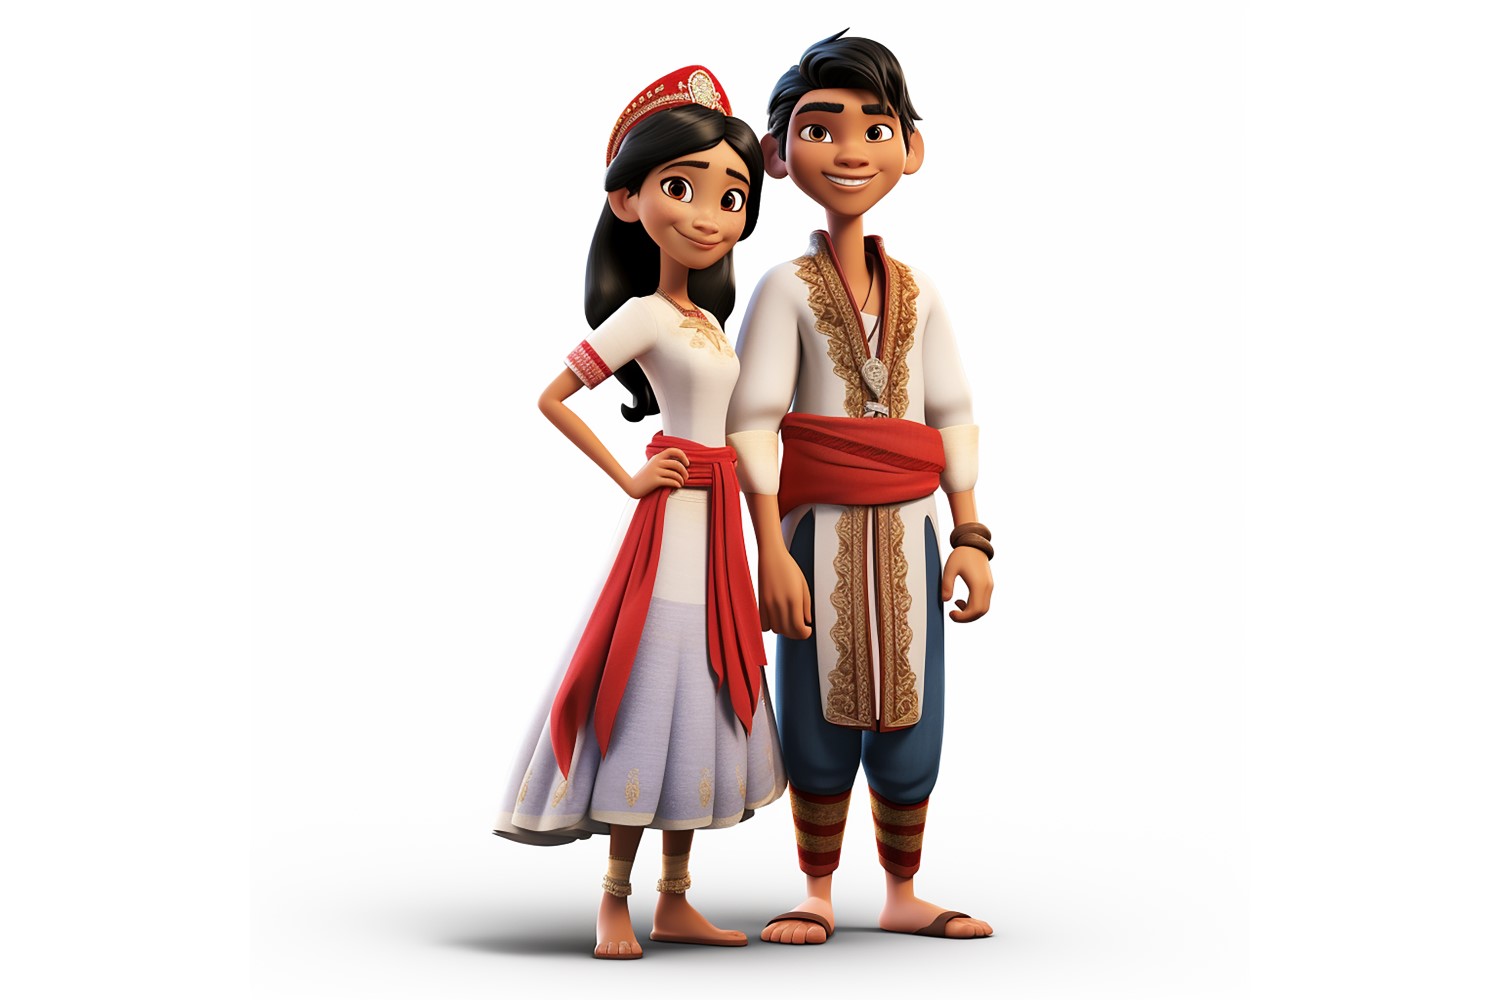 Boy & Girl couple world Races in traditional cultural dress 53.